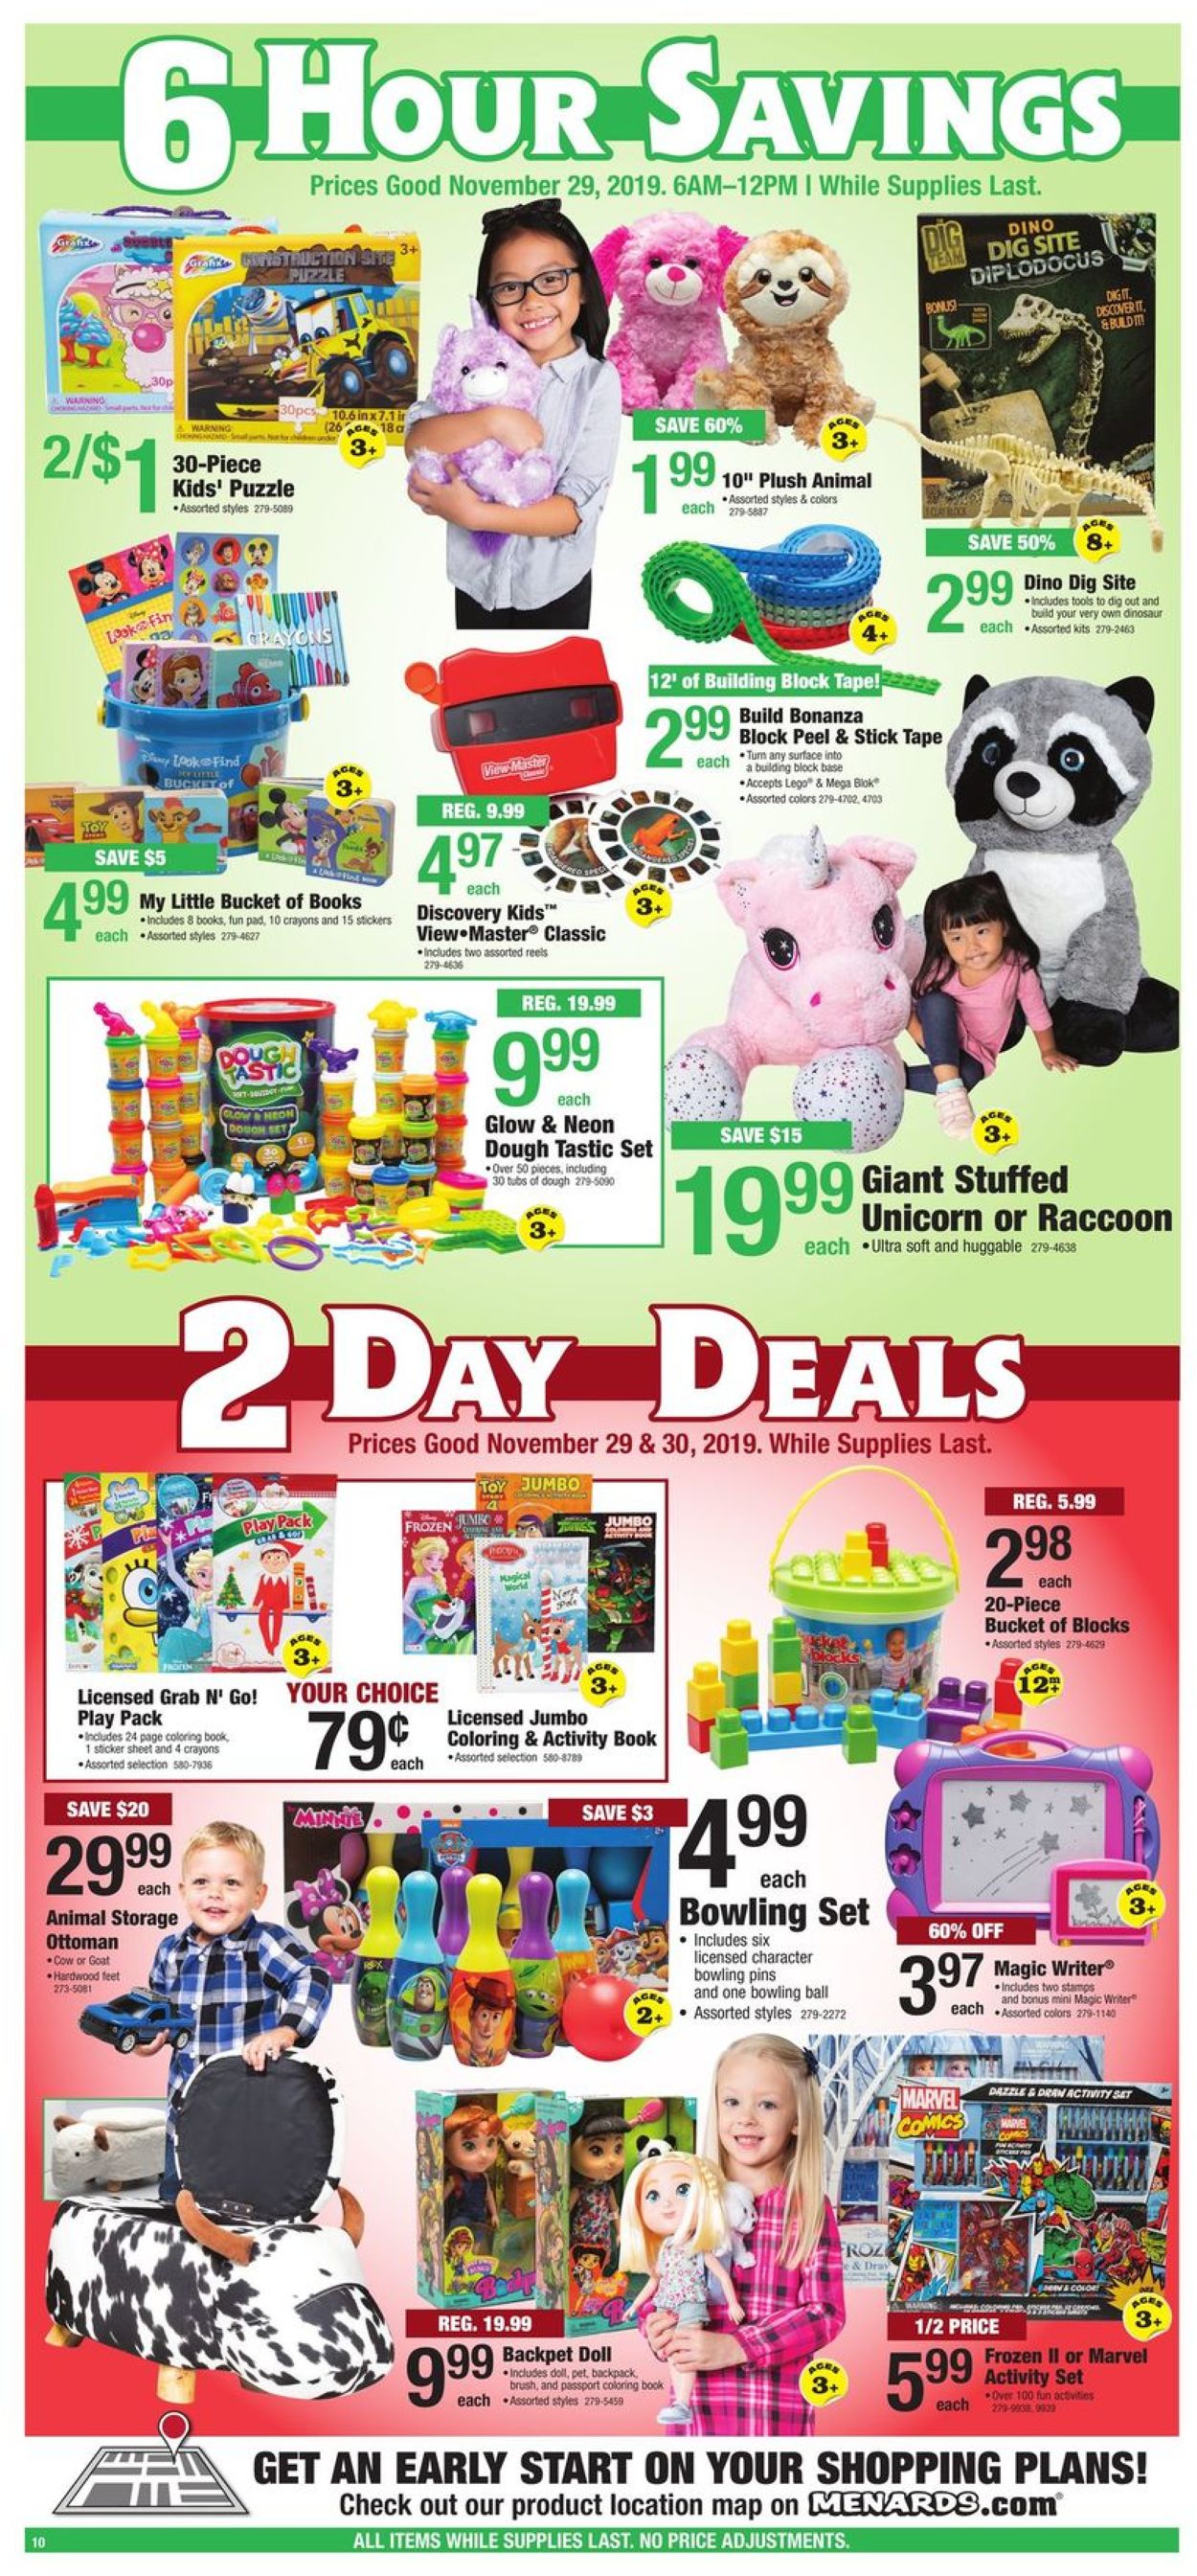 Menards - Black Friday Sale 2019 Current weekly ad 11/29 - 11/30/2019 [11] - 0